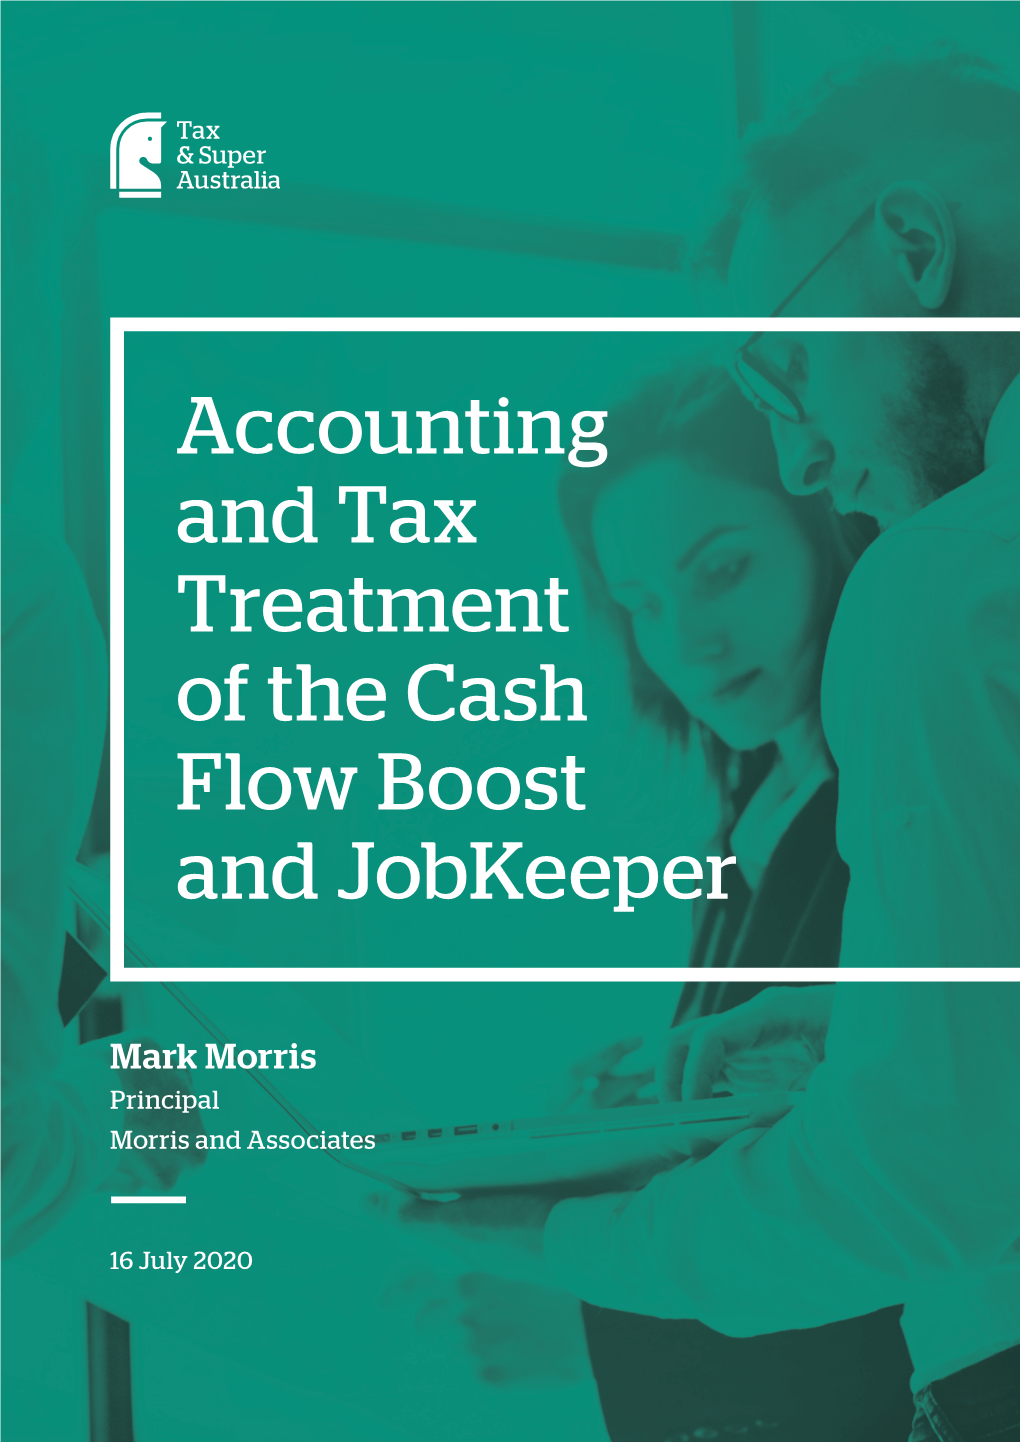 Accounting and Tax Treatment of the Cash Flow Boost and Jobkeeper